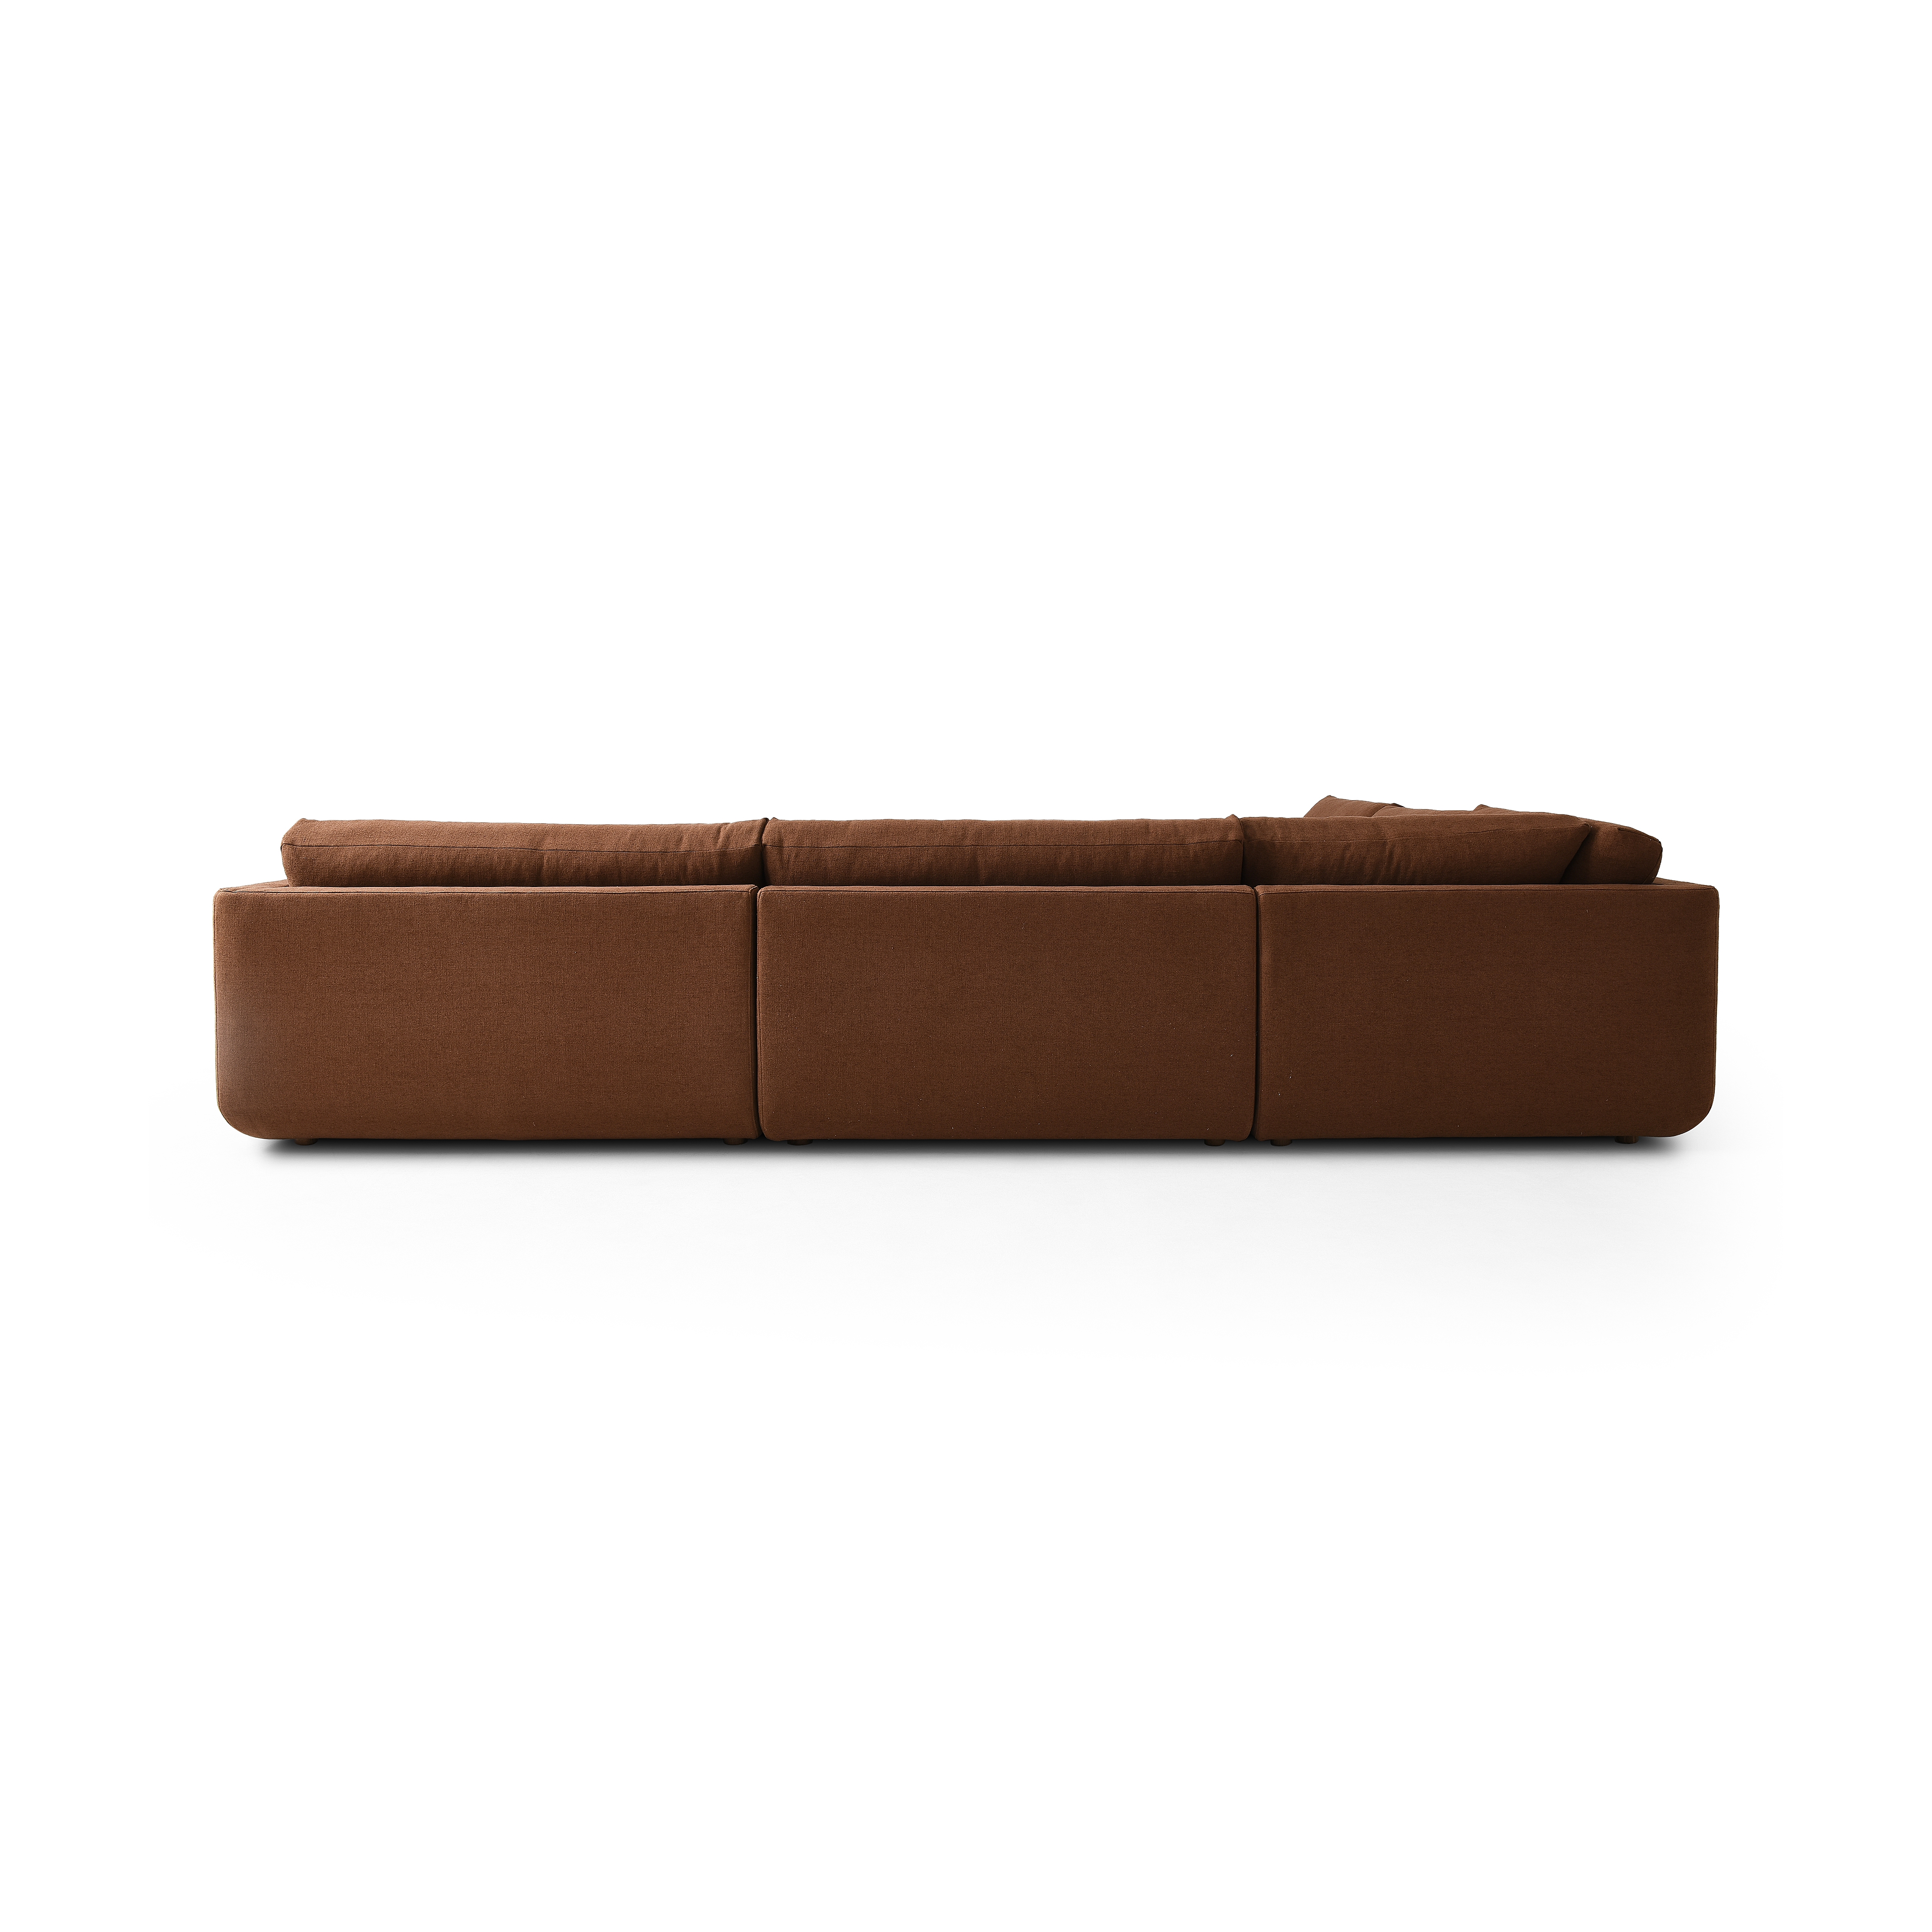 Toland 5pc Sectional-145"-Bartin Rust - Image 4